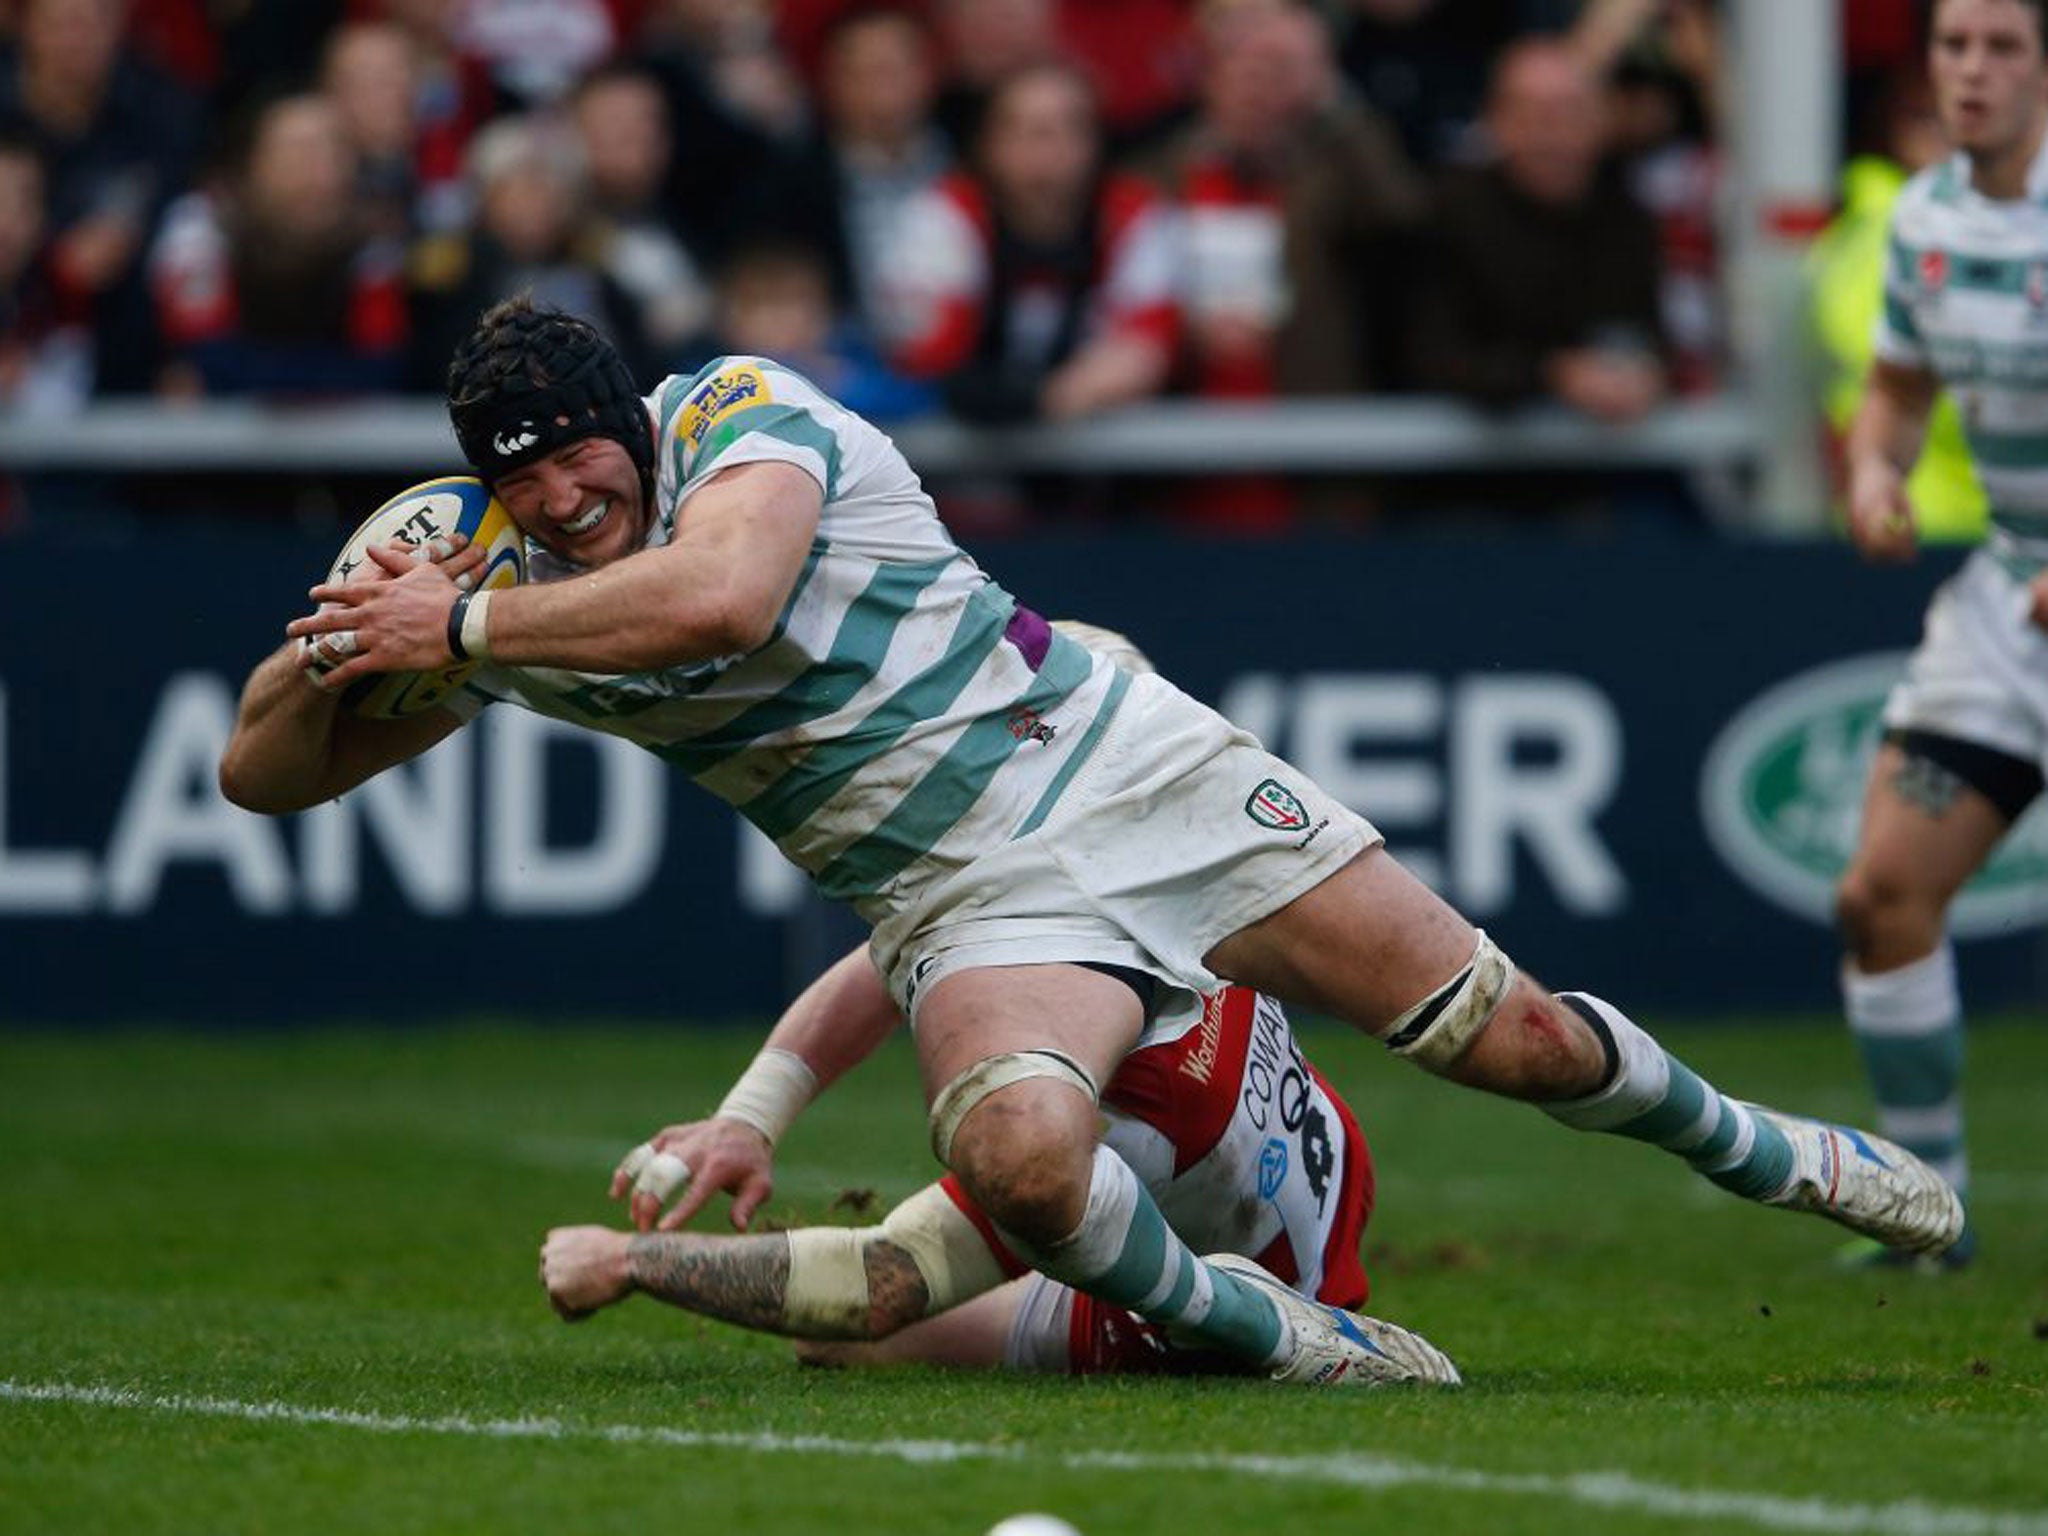 George Skivington scores his second try for London Irish at Gloucester